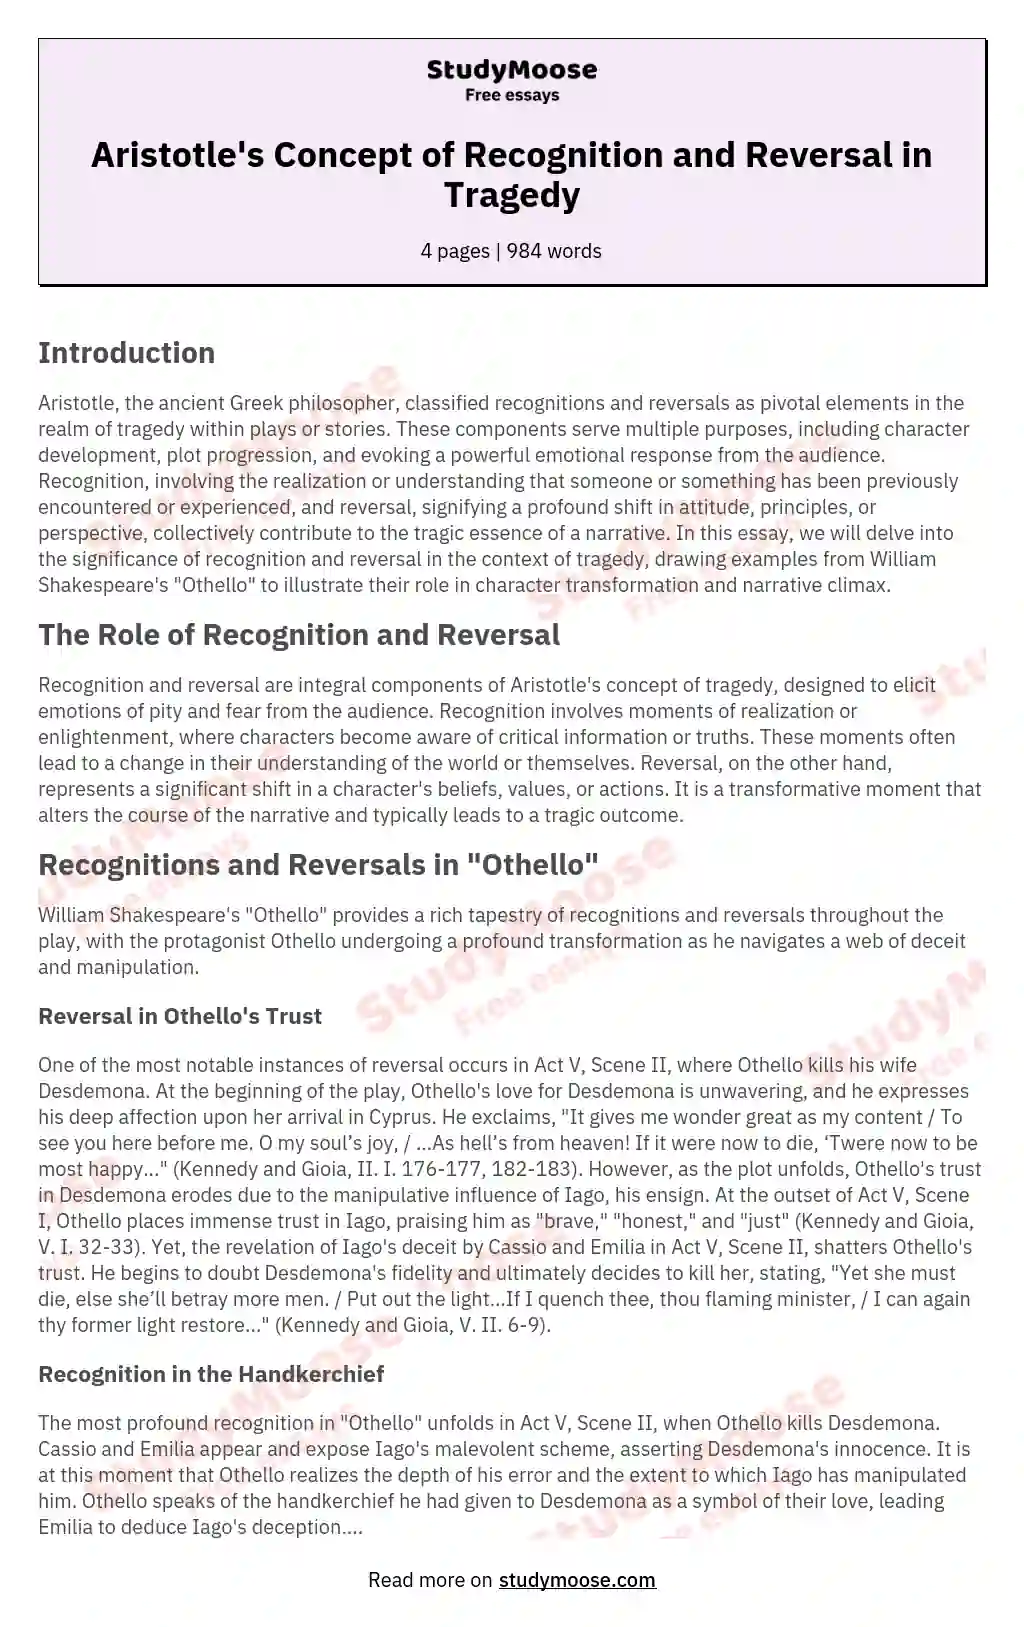 Aristotle's Concept of Recognition and Reversal in Tragedy essay